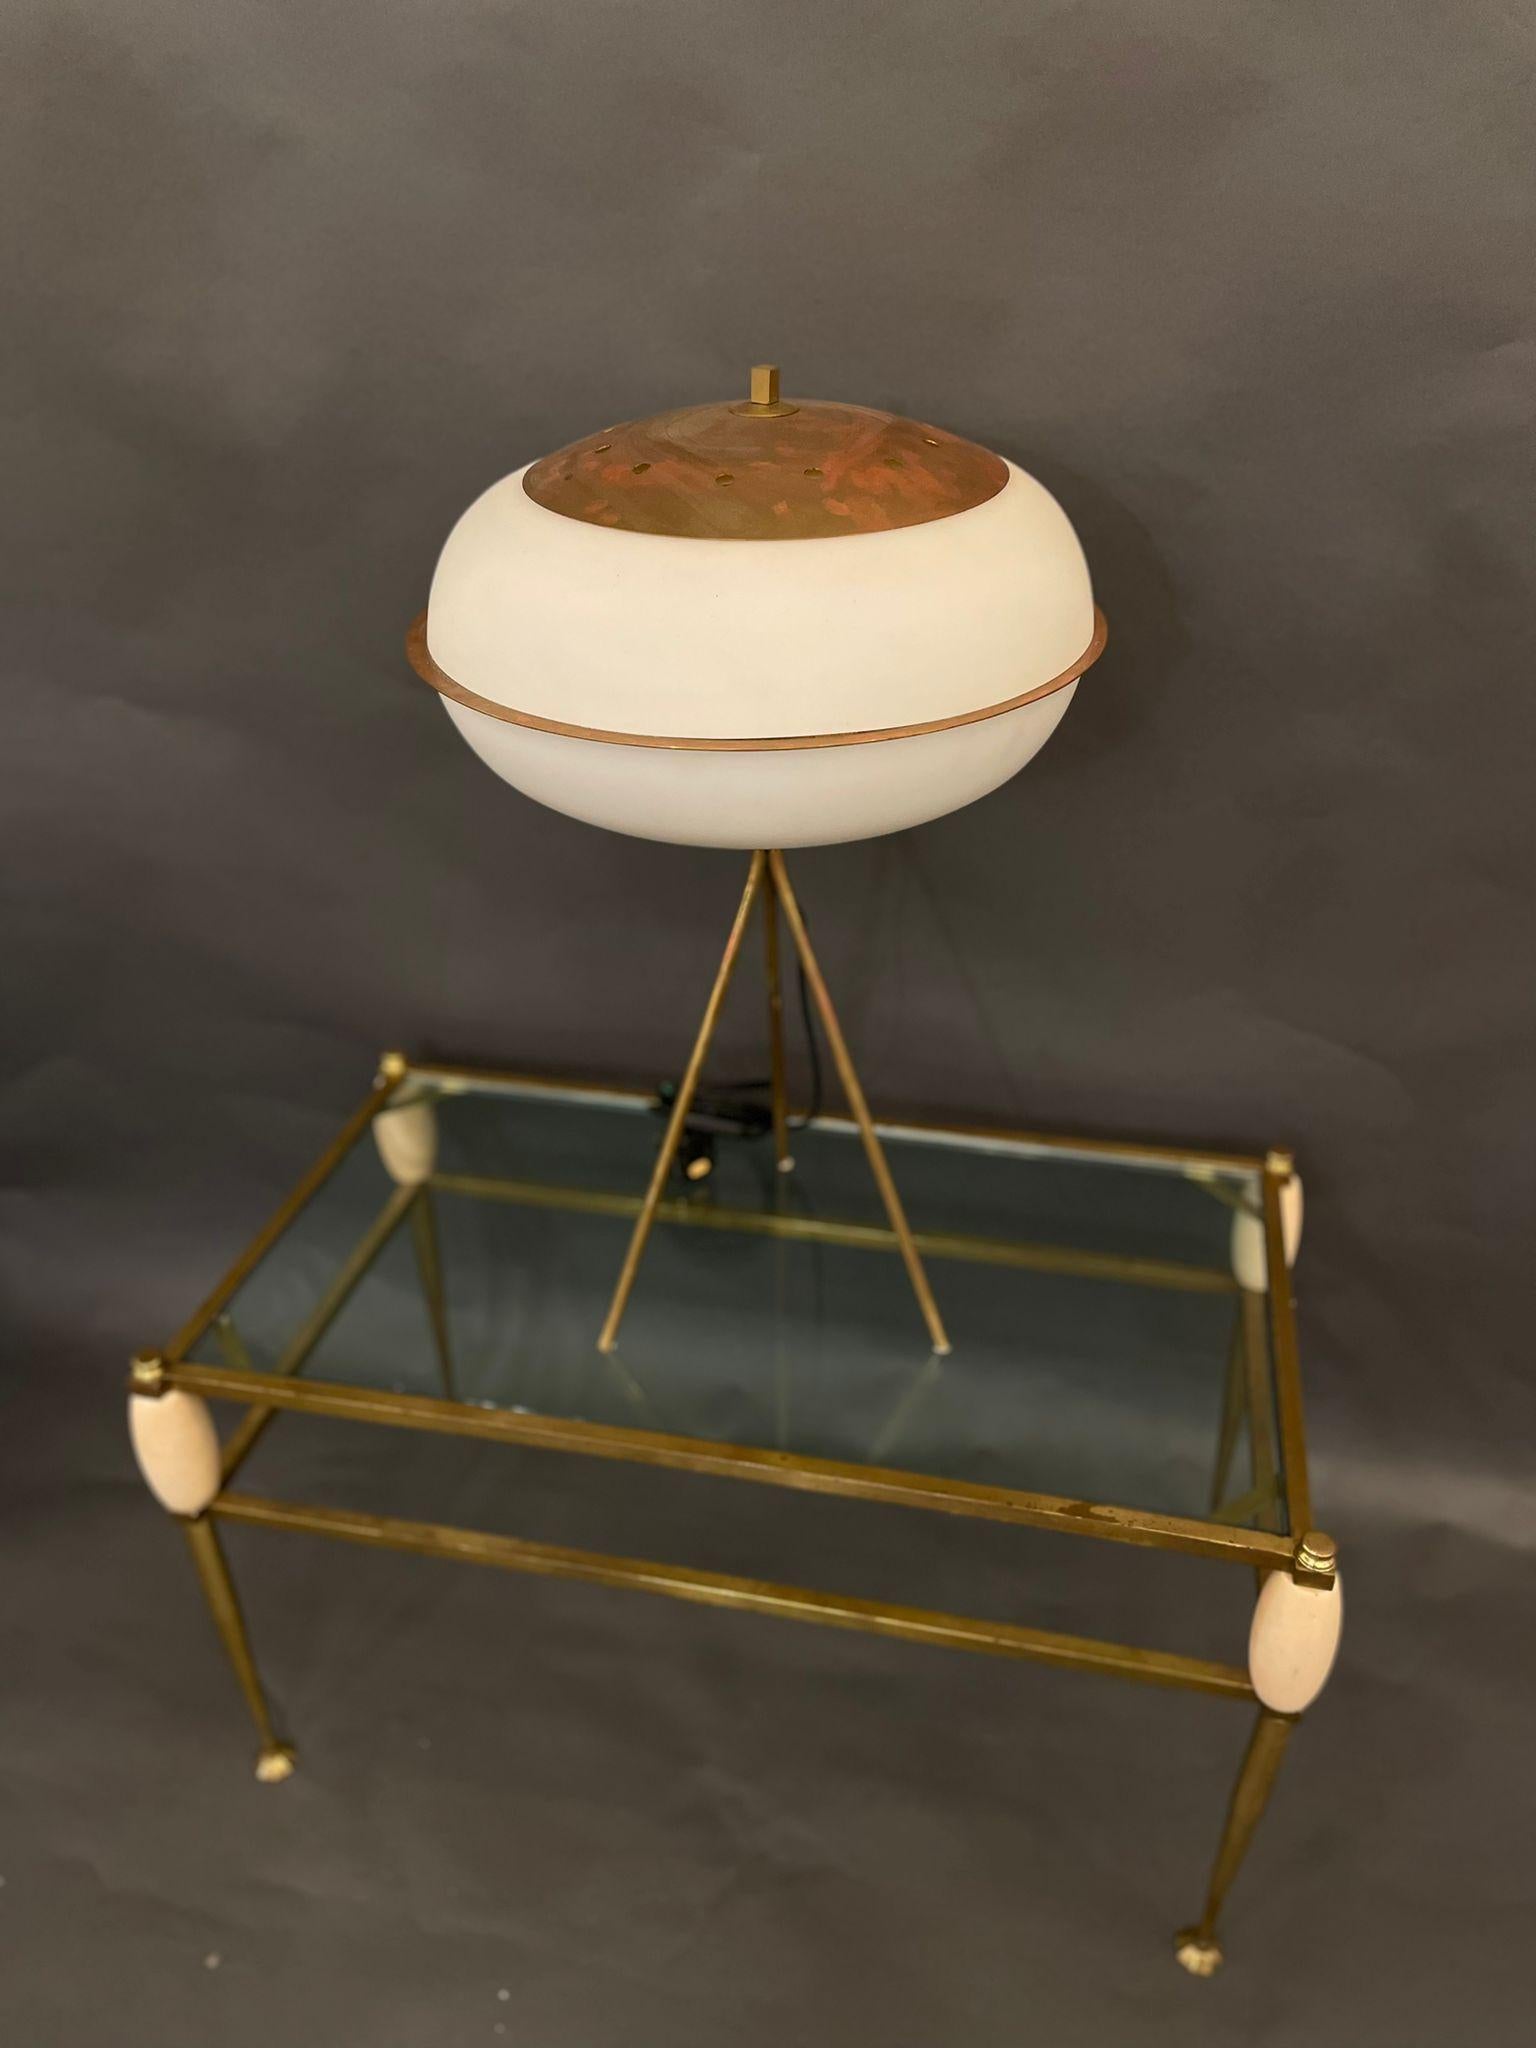 A modernist Italian Table lamp with white frosted shade and brass legs, circa 1970s.